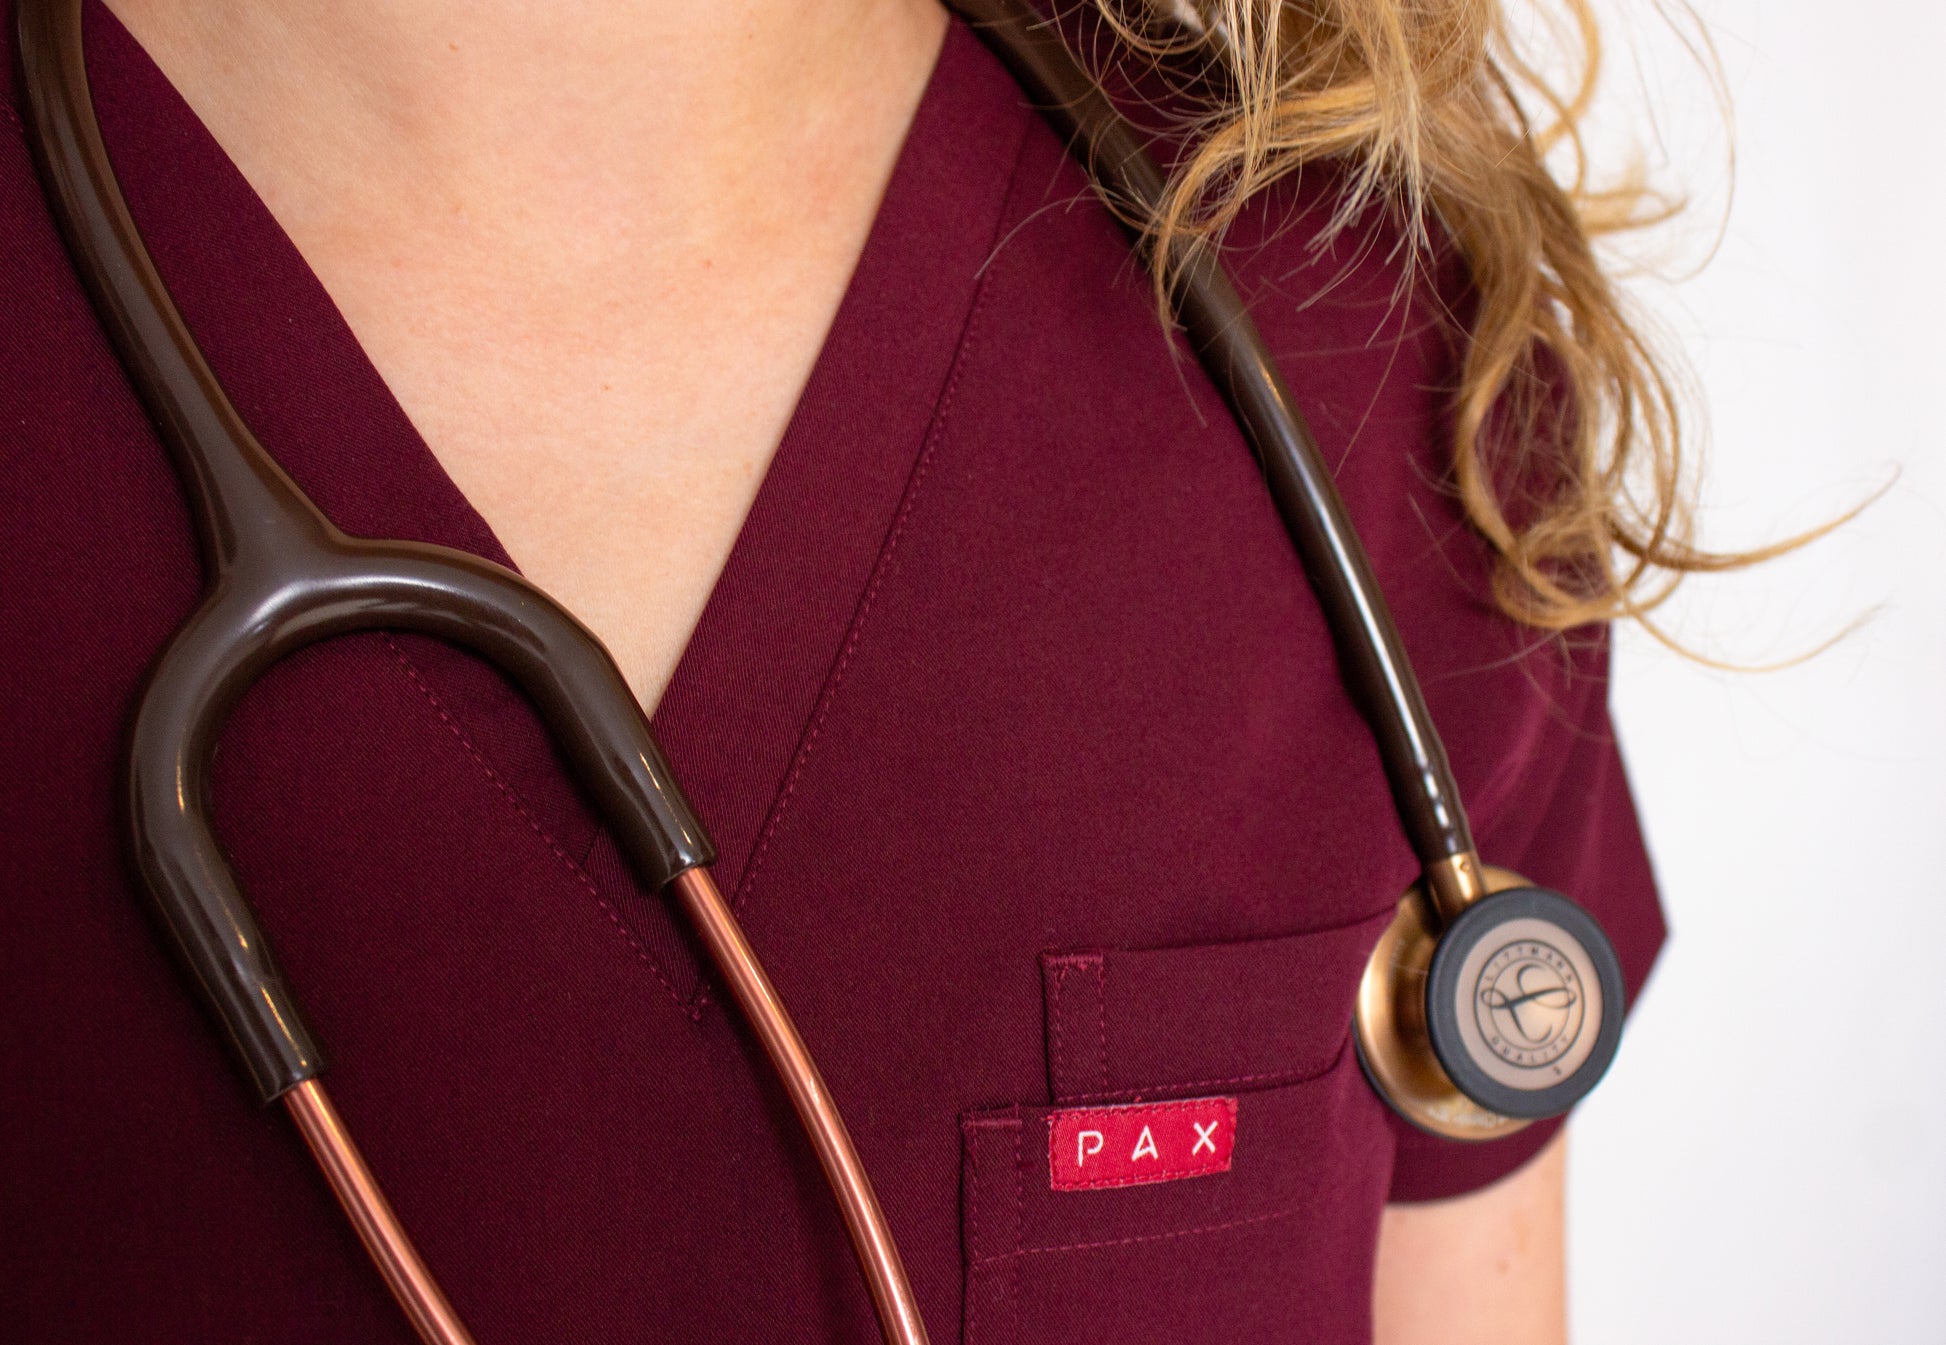 Close-up of carmine PAX logo on female crimson red scrub top's double breast pocket with stethoscope.